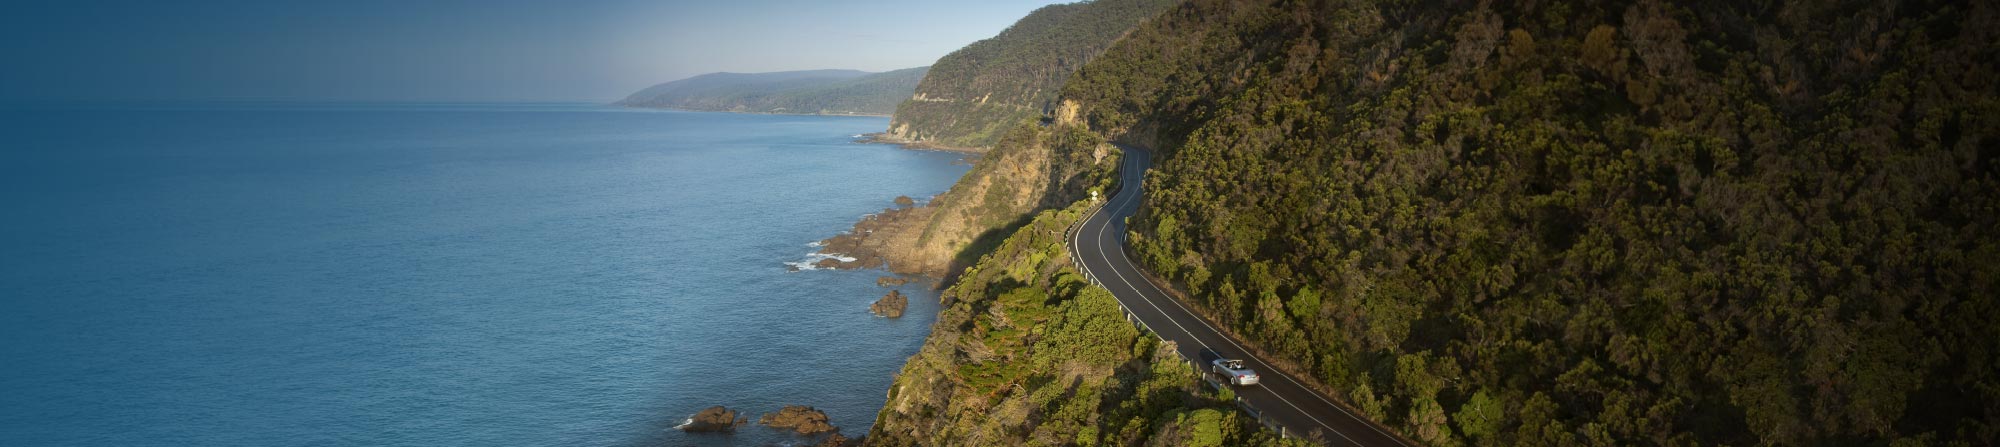 Aerial view of the great ocean road winding along, cut into the side of cliffs that drop into the sea